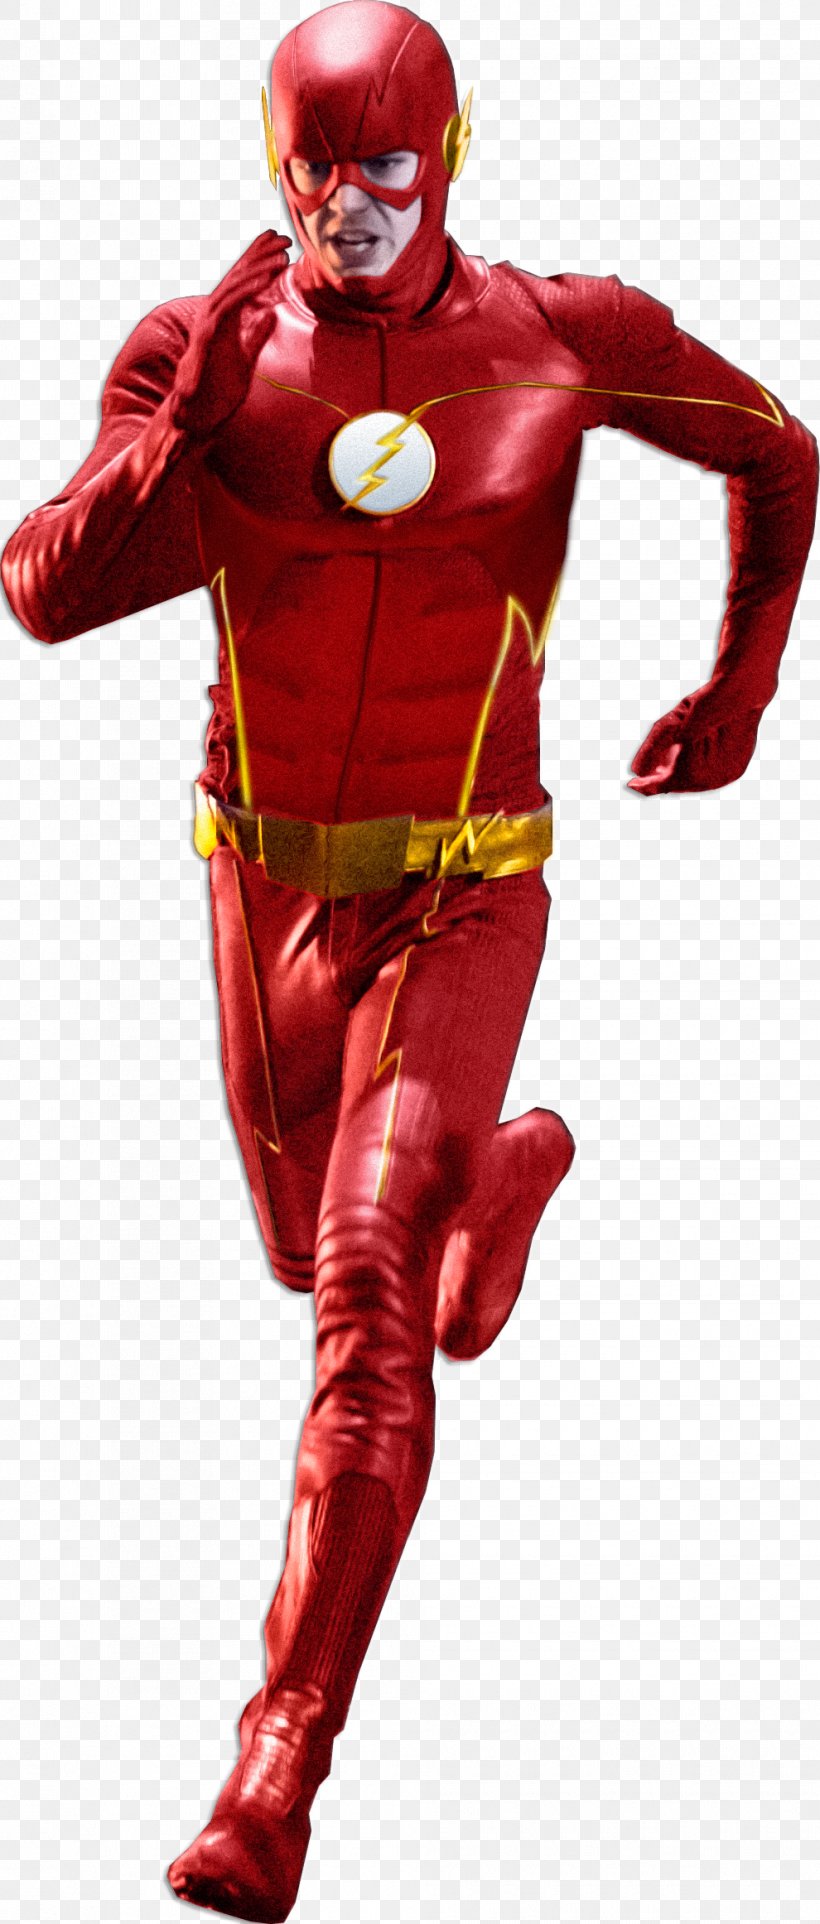 Wally West Rendering Clip Art, PNG, 990x2324px, Wally West, Costume ...